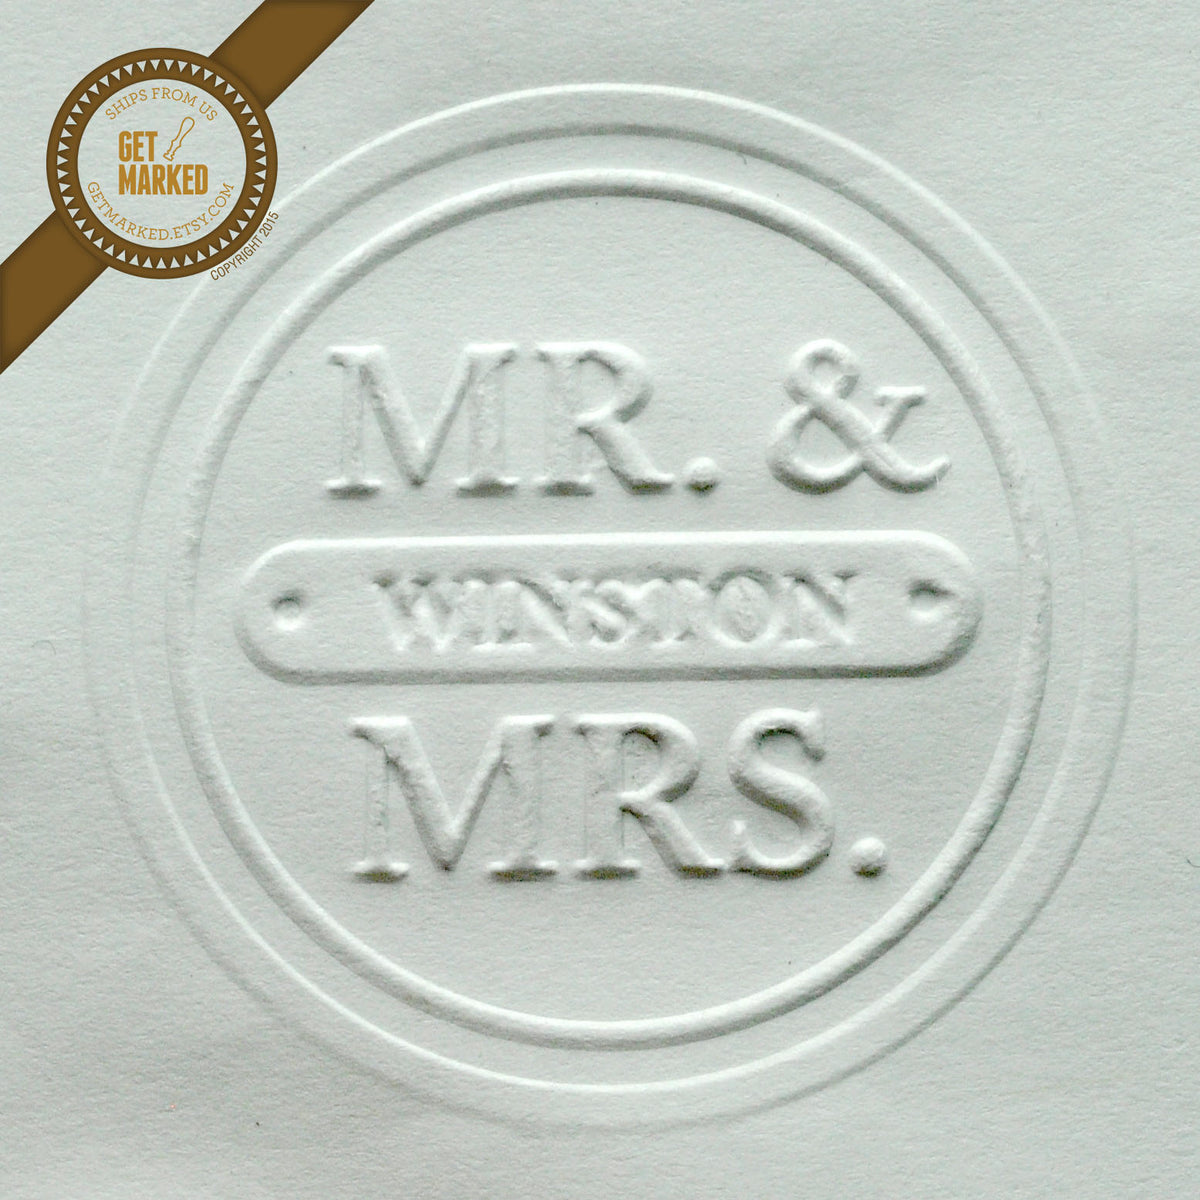 Mr. &amp; Mrs. - Customized  Embosser Stamp by Get Marked (ES0002)